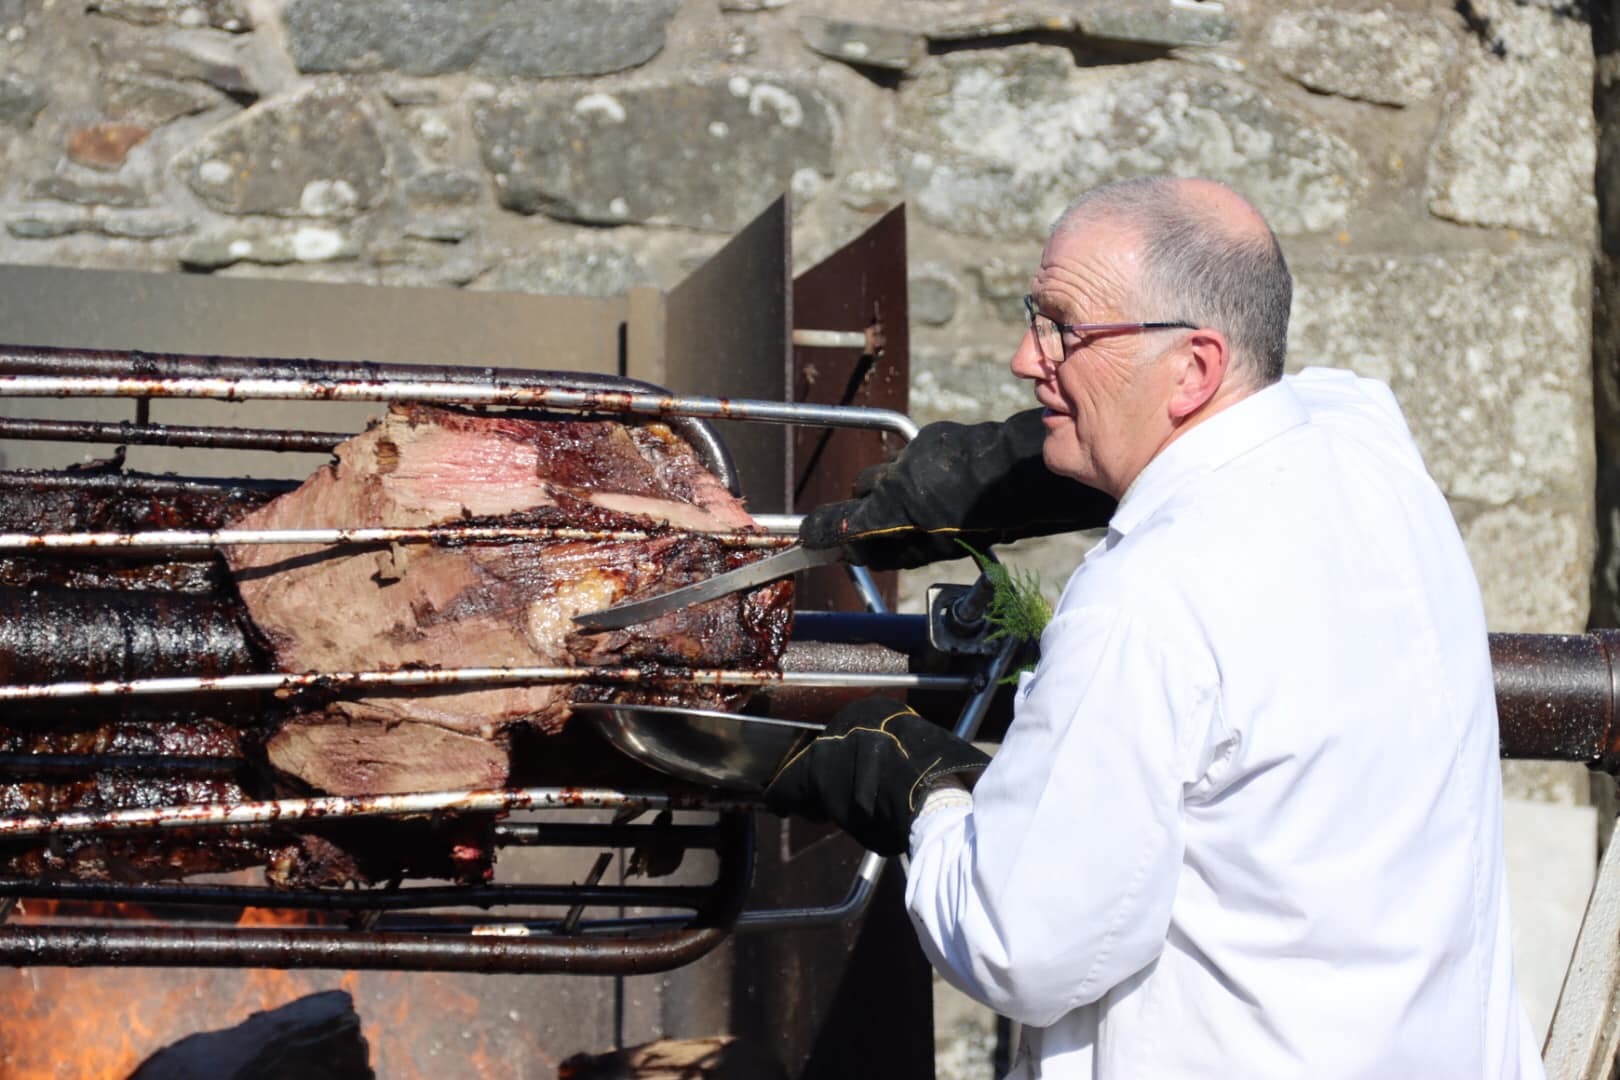 Big crowds were reported at the St Keverne hog roast yesterday. Pictures Liz Richardson/Packet Camera Club